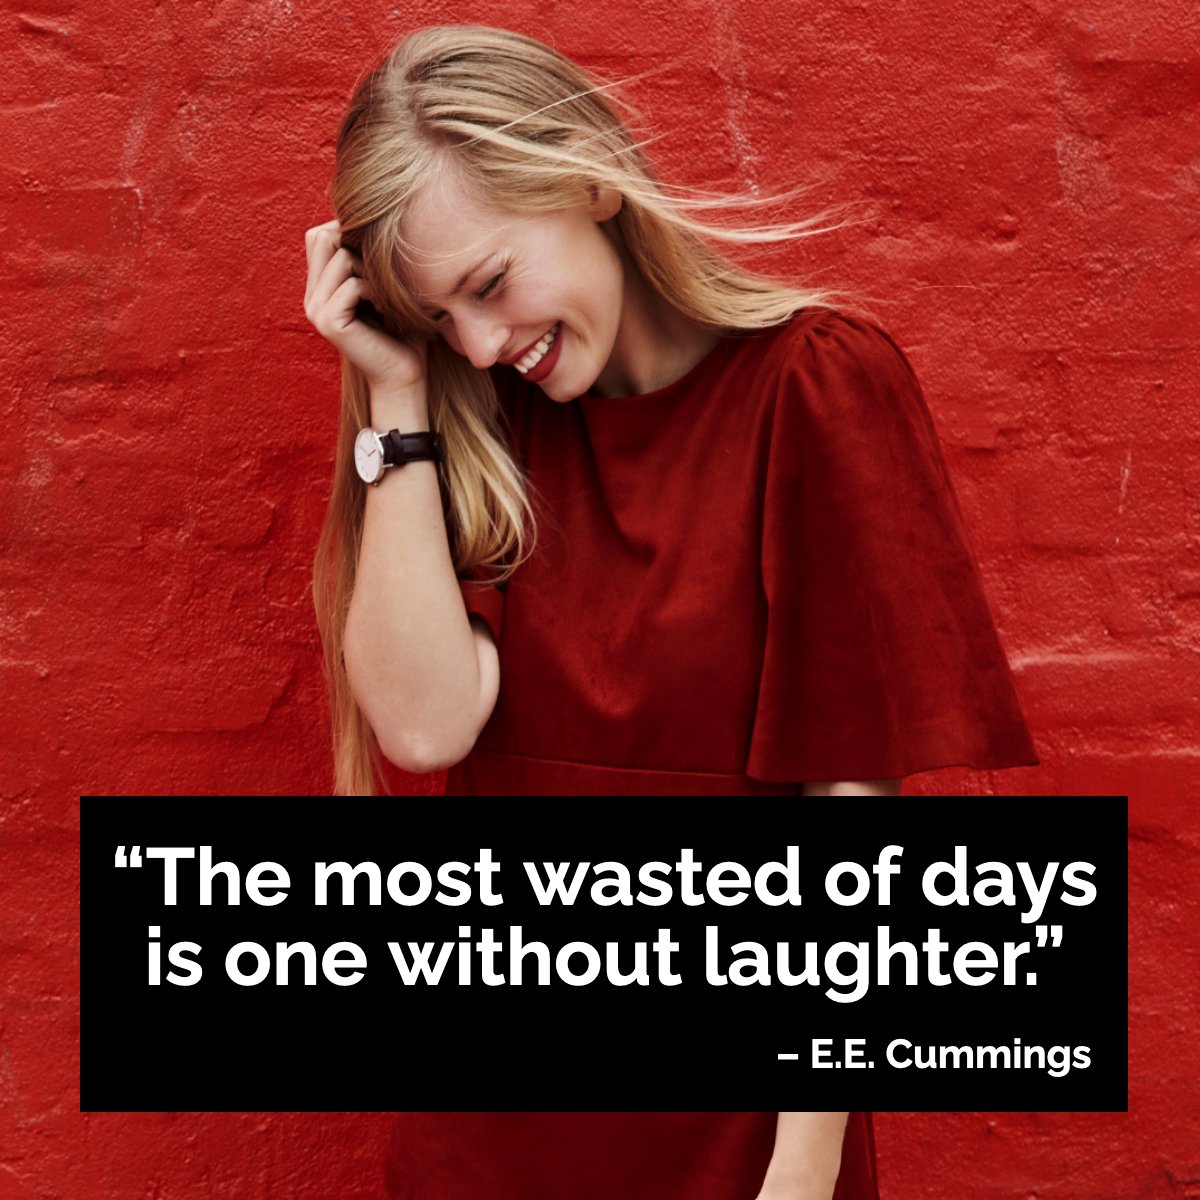 Laughter is one of the most valuable things in your life. 💯

#wisdomquote #wisdomoftheday #quotegram #quoteoftheday  #eecummings
 #socialposts